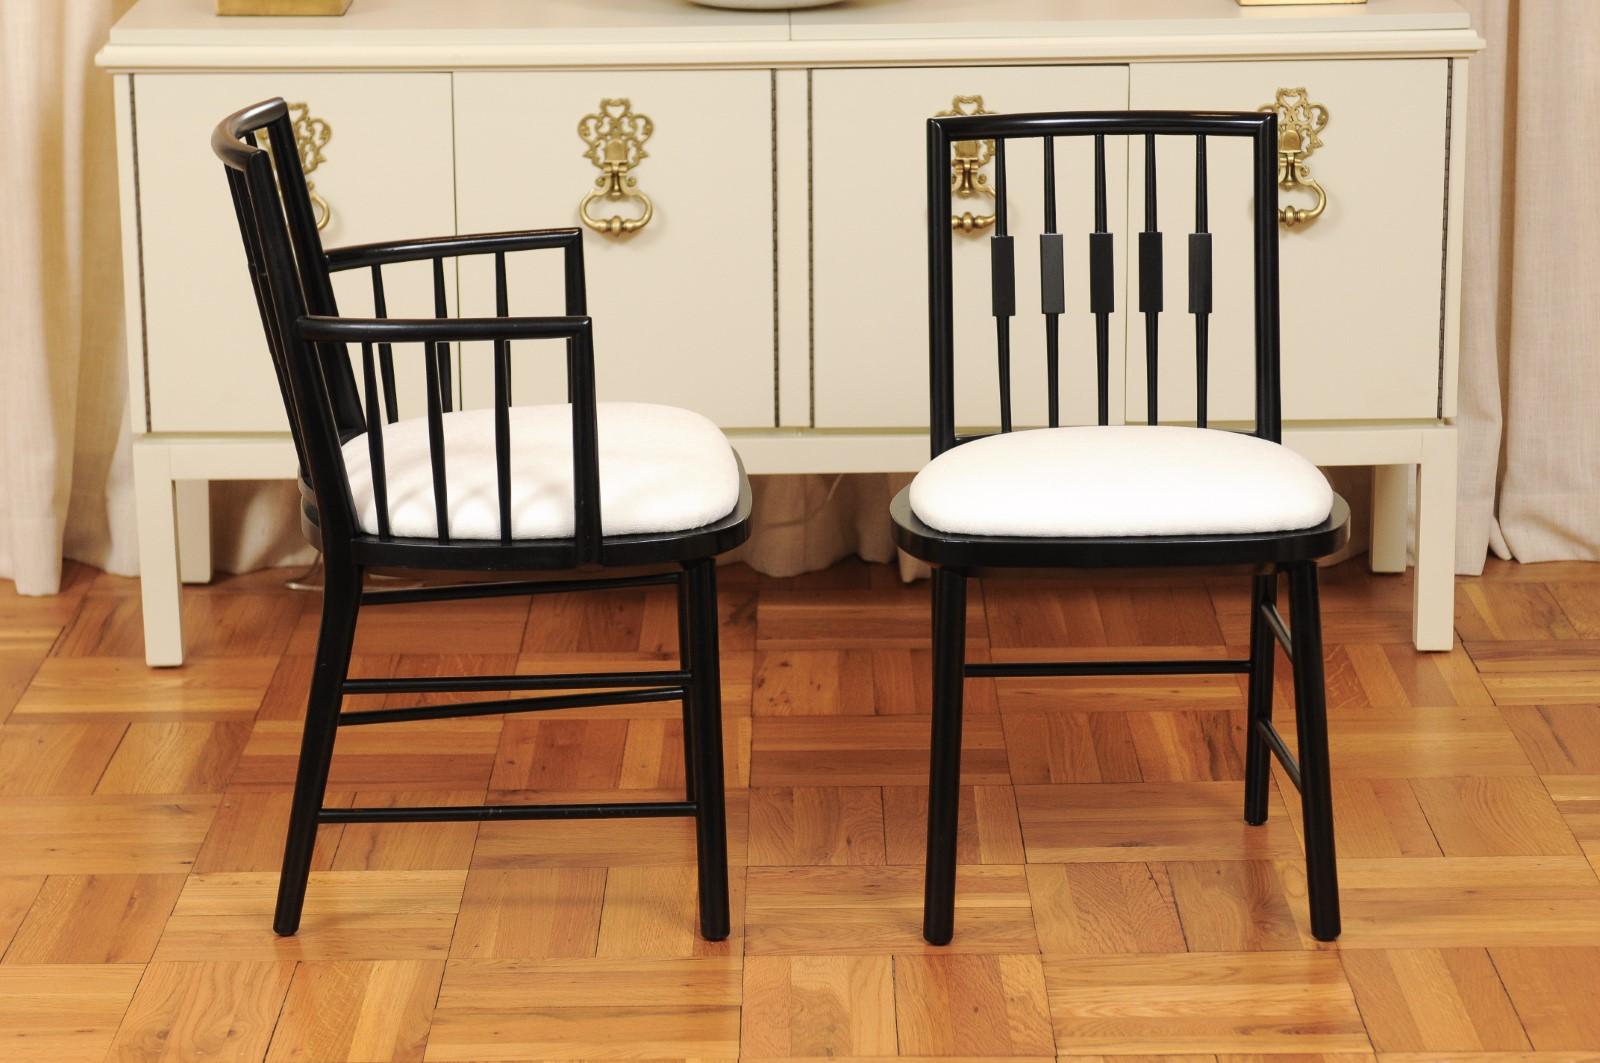  Stellar Set of 12 Modern Windsor Chairs by Michael Taylor, circa 1960 In Excellent Condition For Sale In Atlanta, GA